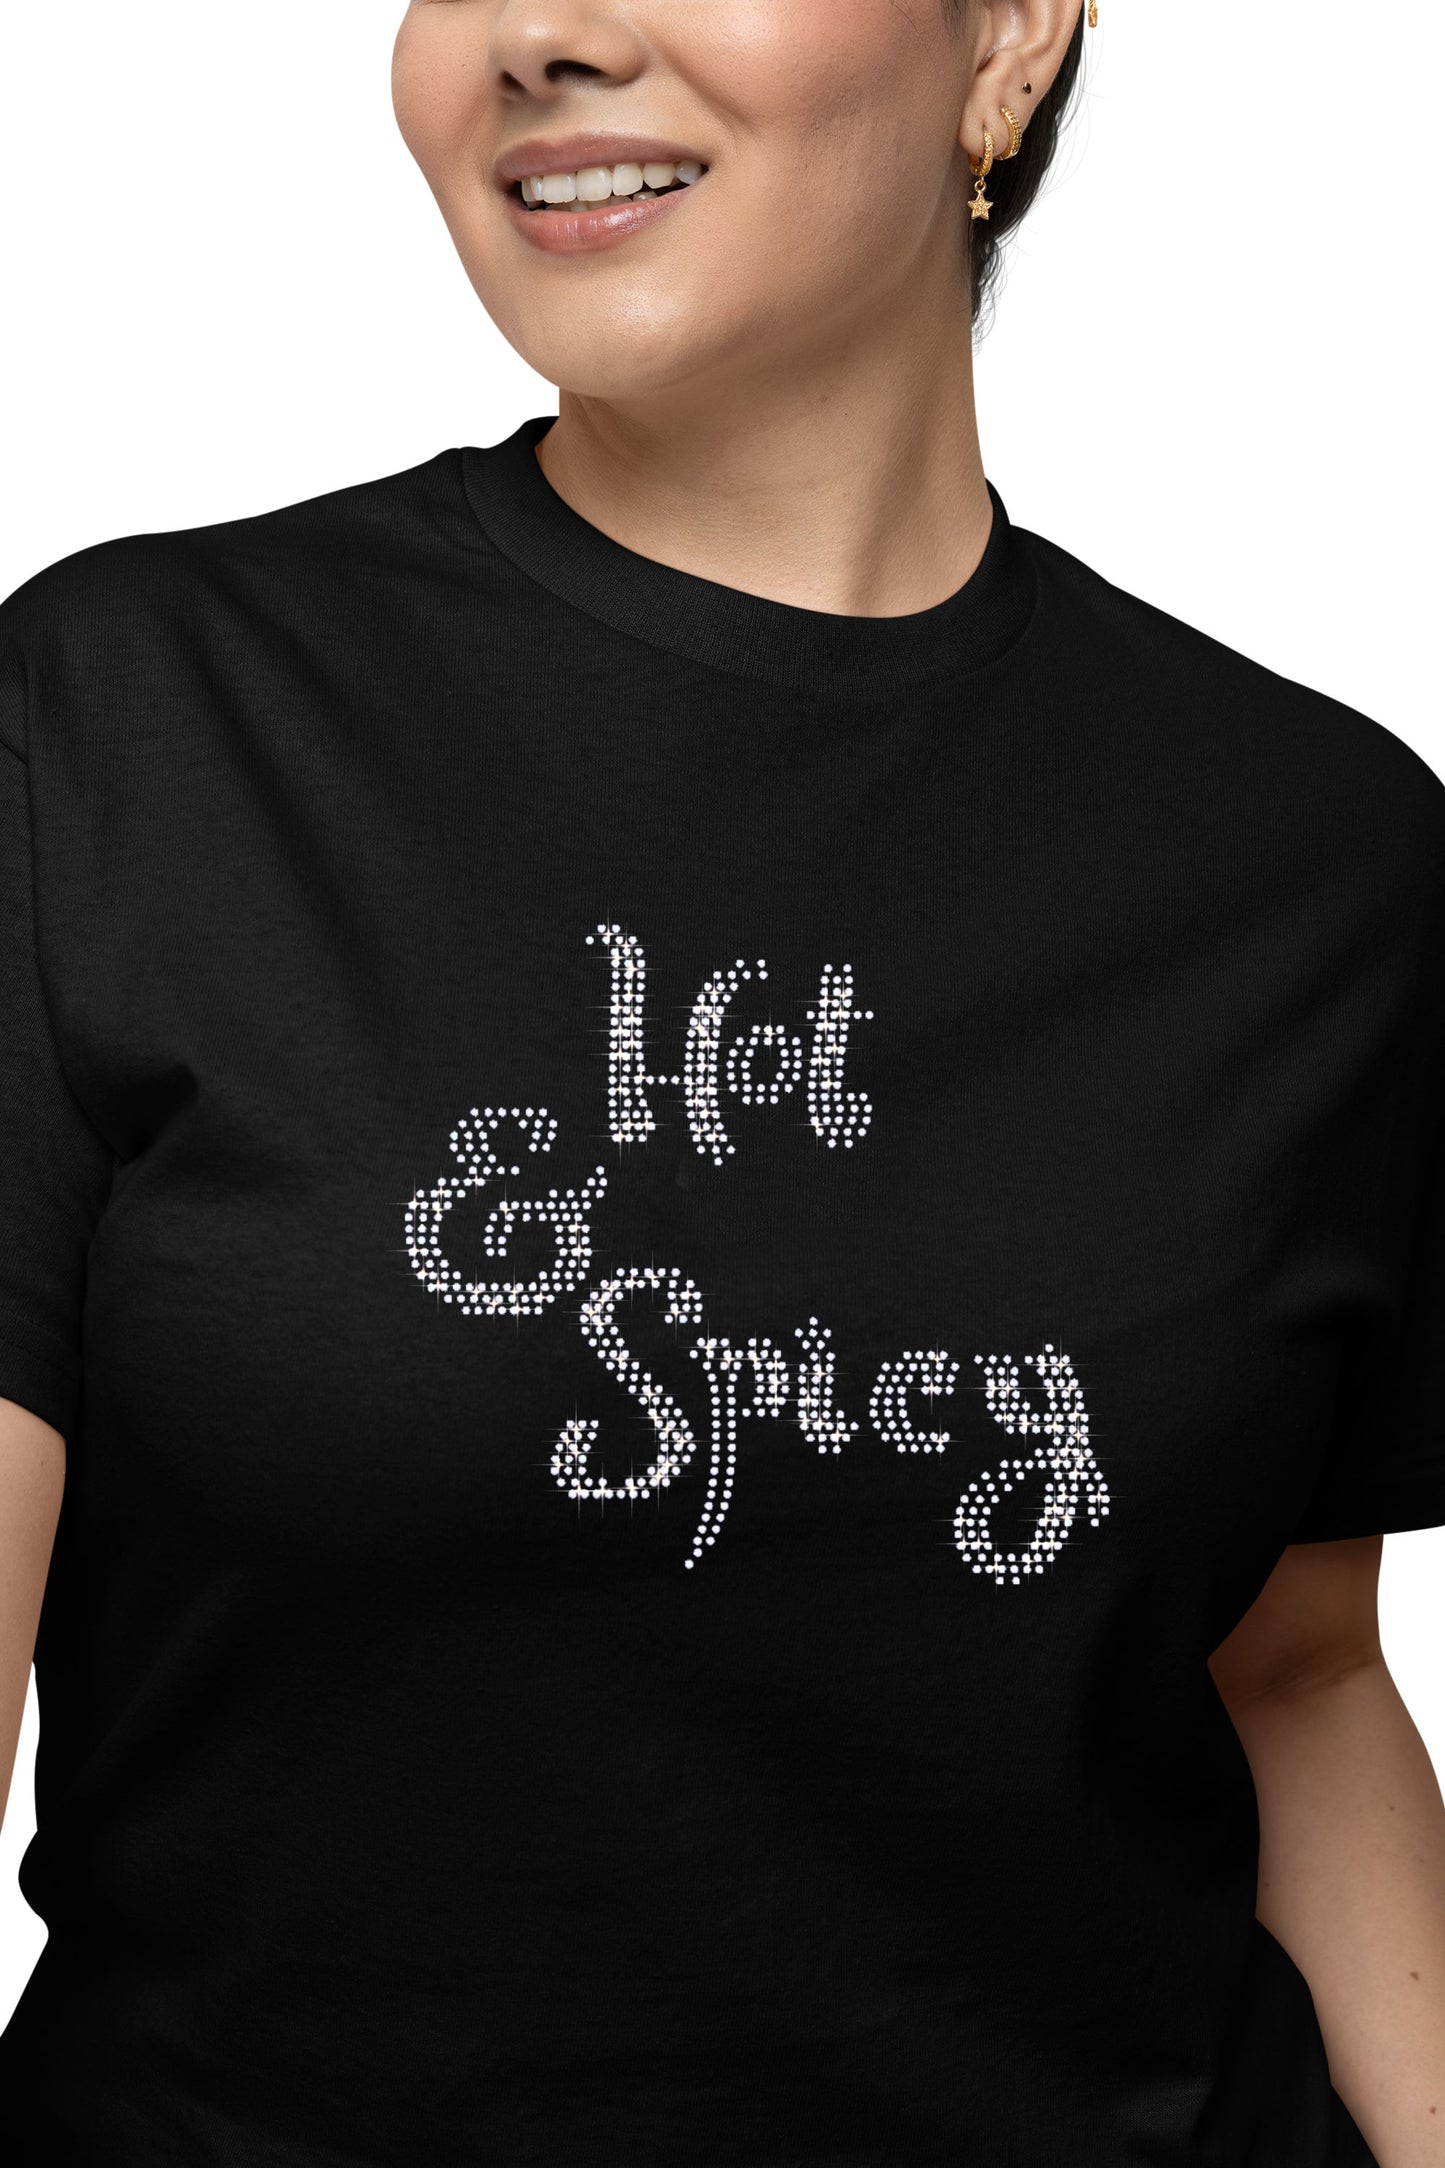 Hot and Spicy Rhinestone Self Expression Tee